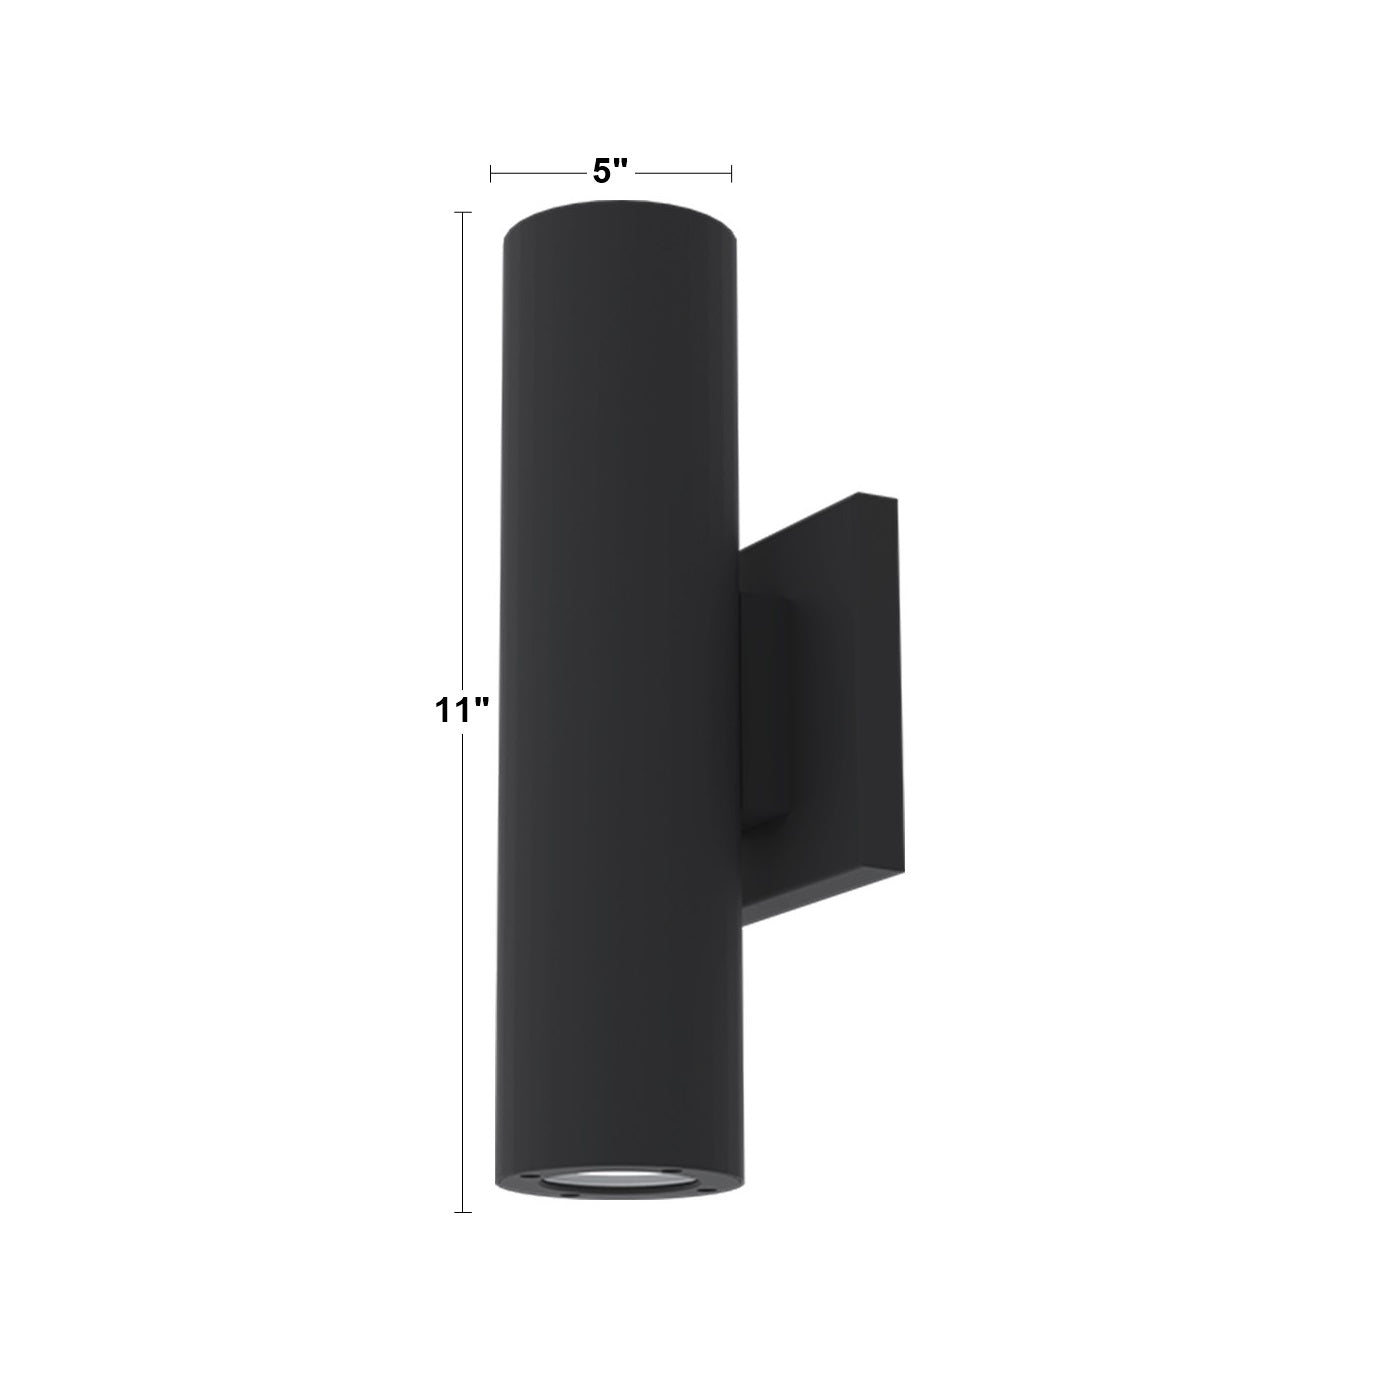 Volta 11 In 2 Lights Dual Sided Smart Outdoor Cylinder Wall Light Up/Down Light Black Finish